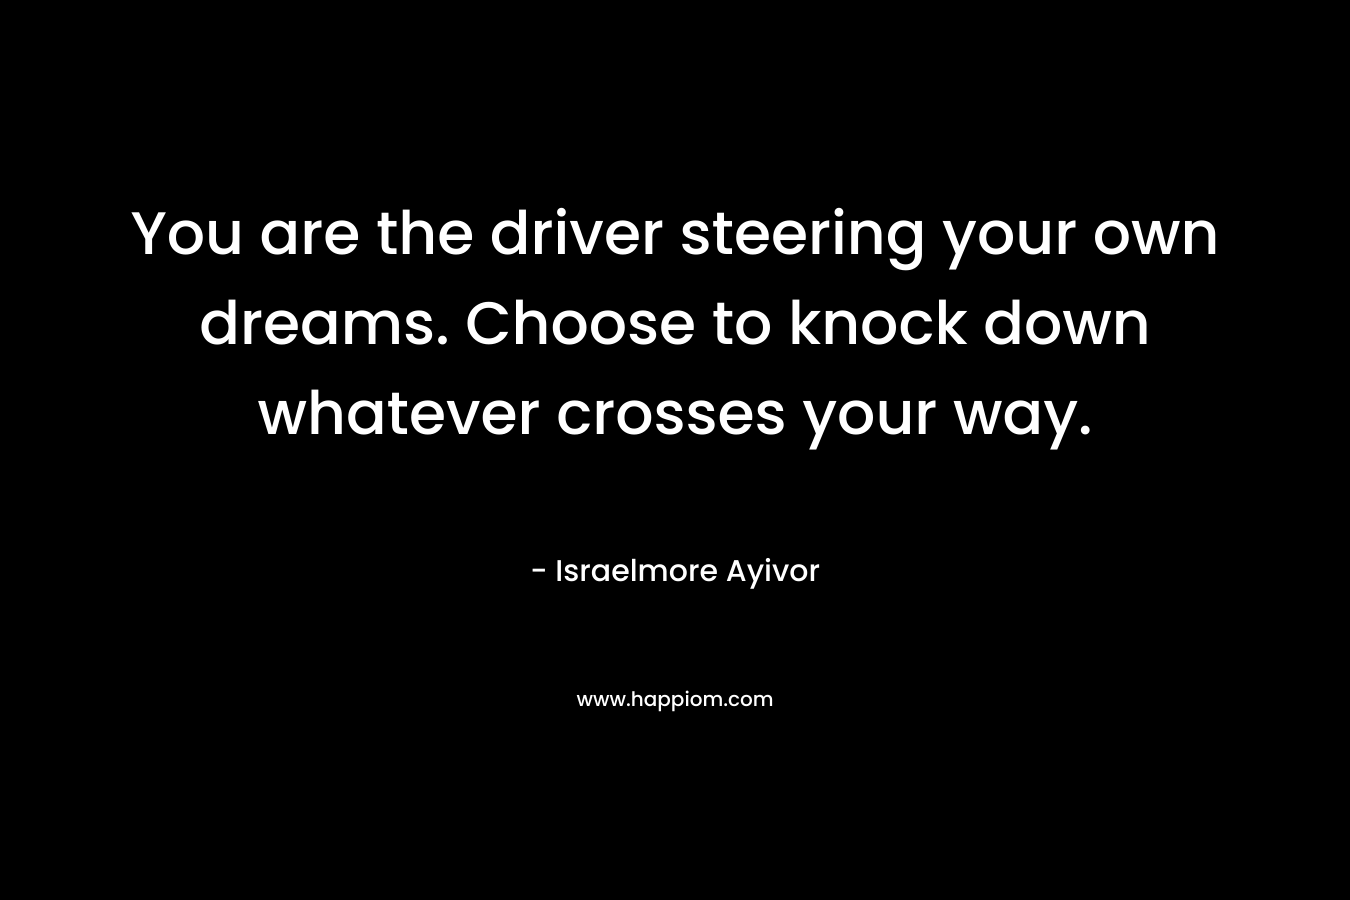 You are the driver steering your own dreams. Choose to knock down whatever crosses your way. – Israelmore Ayivor